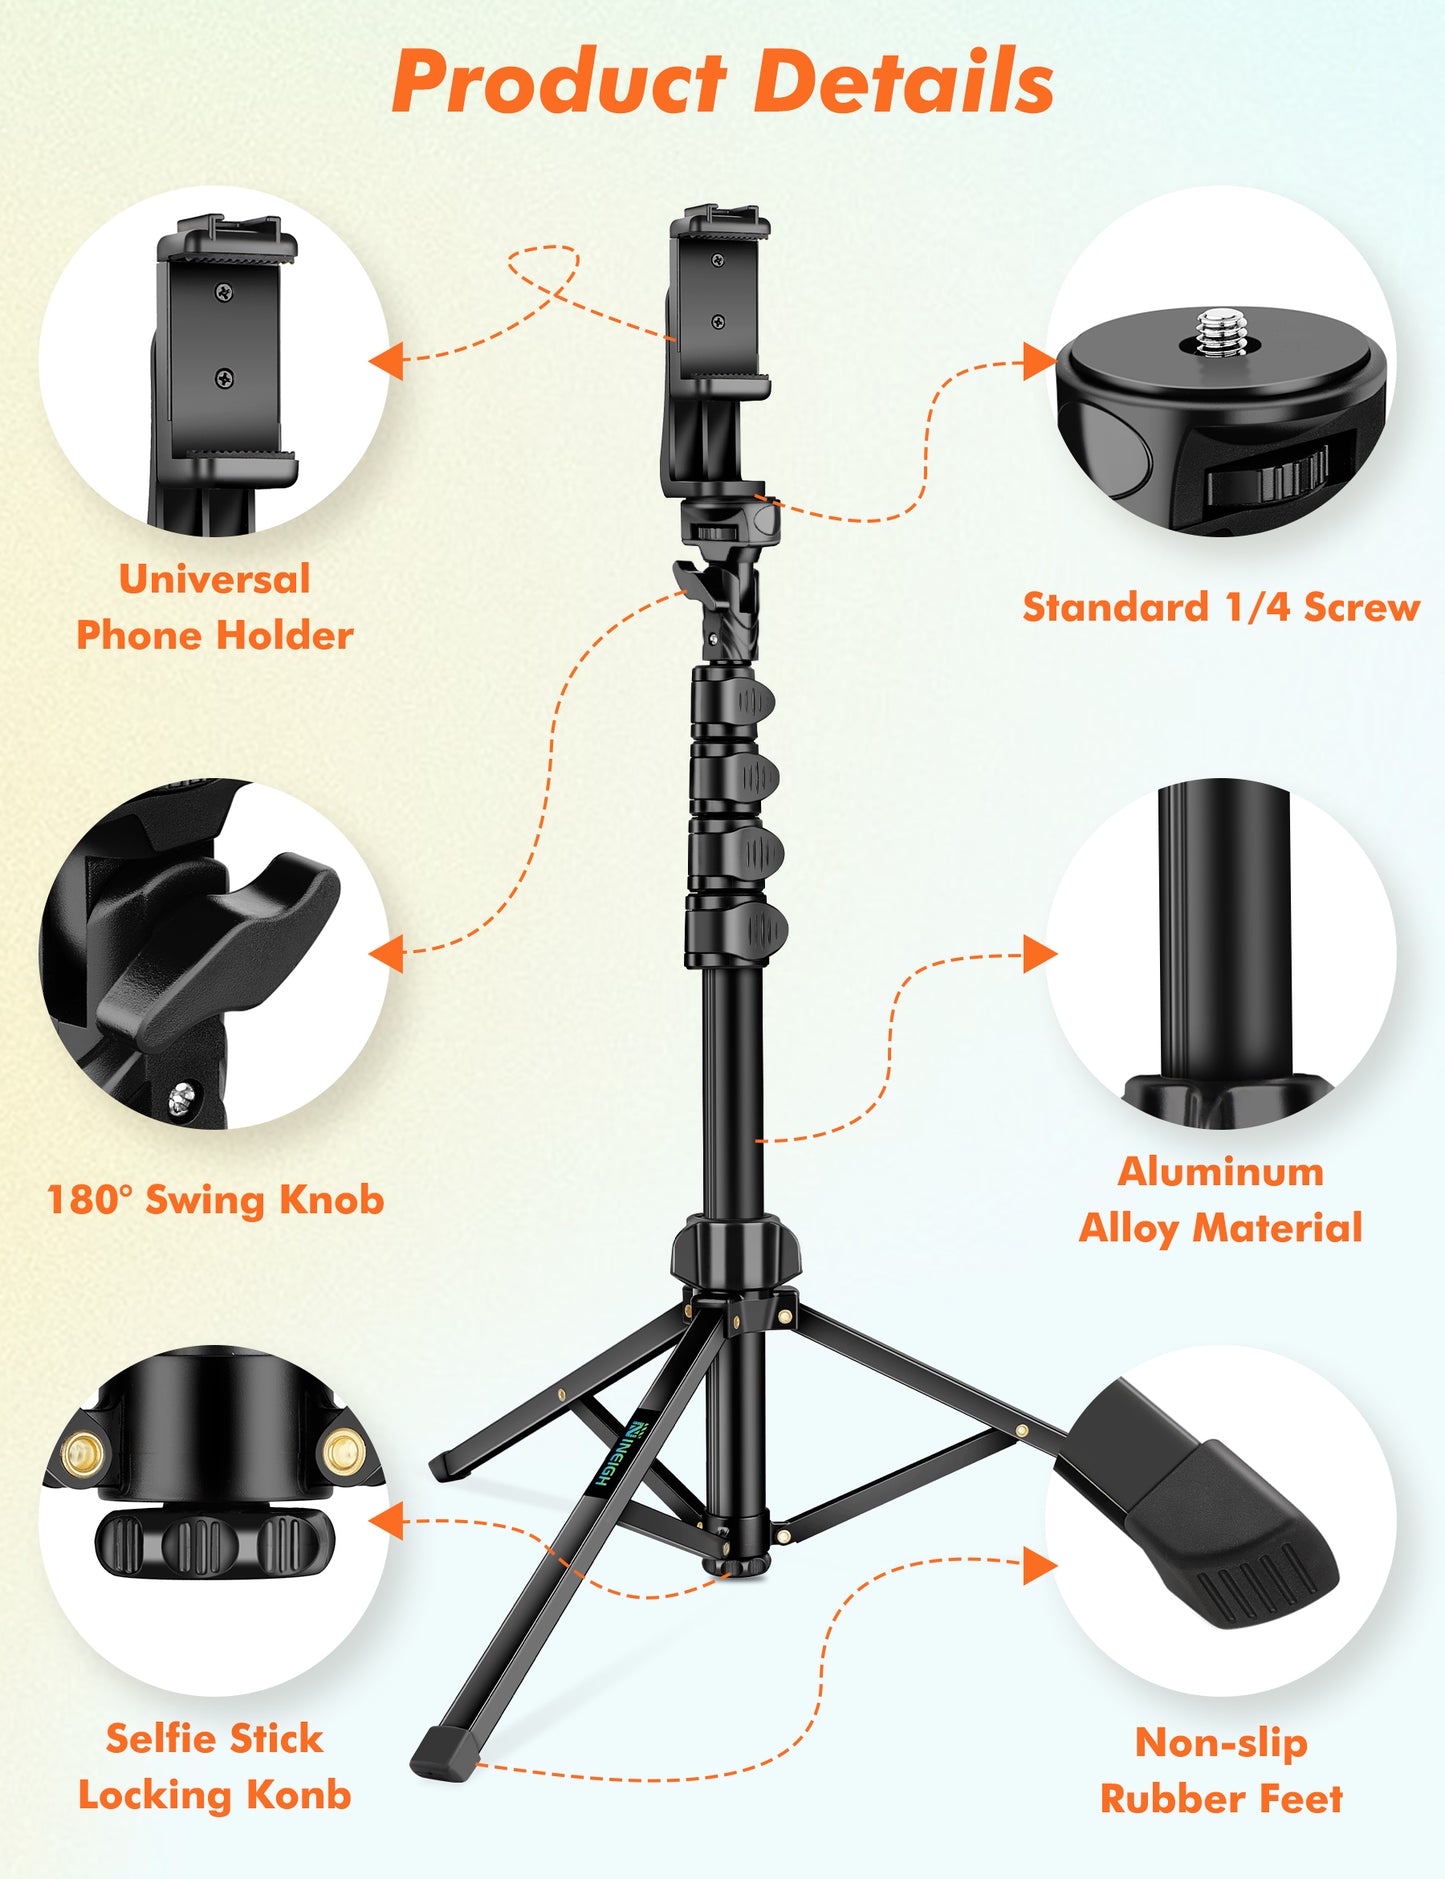 Phone Tripod, 71" Tripod for iPhone, Selfie Stick Tripod Stand with Remote, iPhone Tripod & Tall Travel Tripod for Recording Video Selfies Photo, Compatible with iPhone 14 Pro Max 13 12 11 Cell Phone(USA)